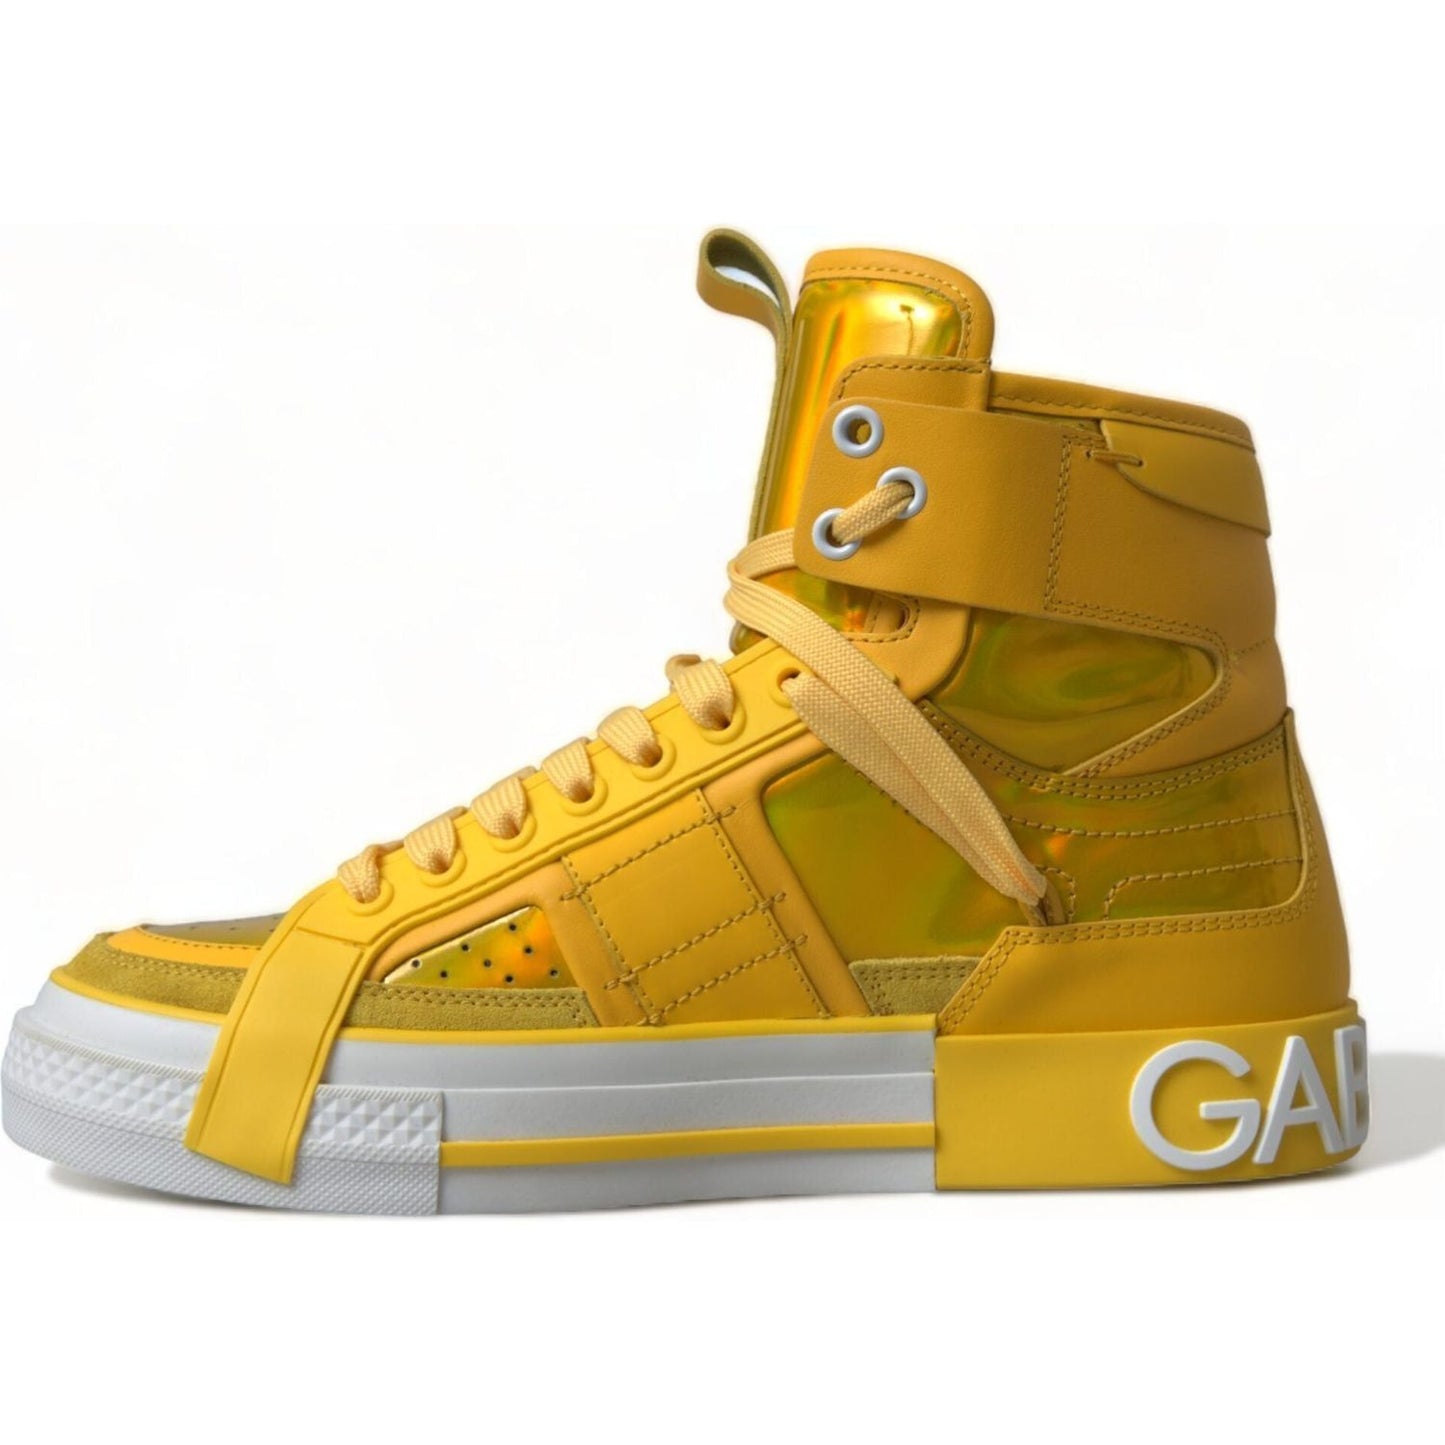 Dolce & Gabbana Chic High-Top Color-Block Sneakers yellow-white-leather-high-top-sneakers-shoes 465A2108-BG-scaled-e30ab827-990.jpg